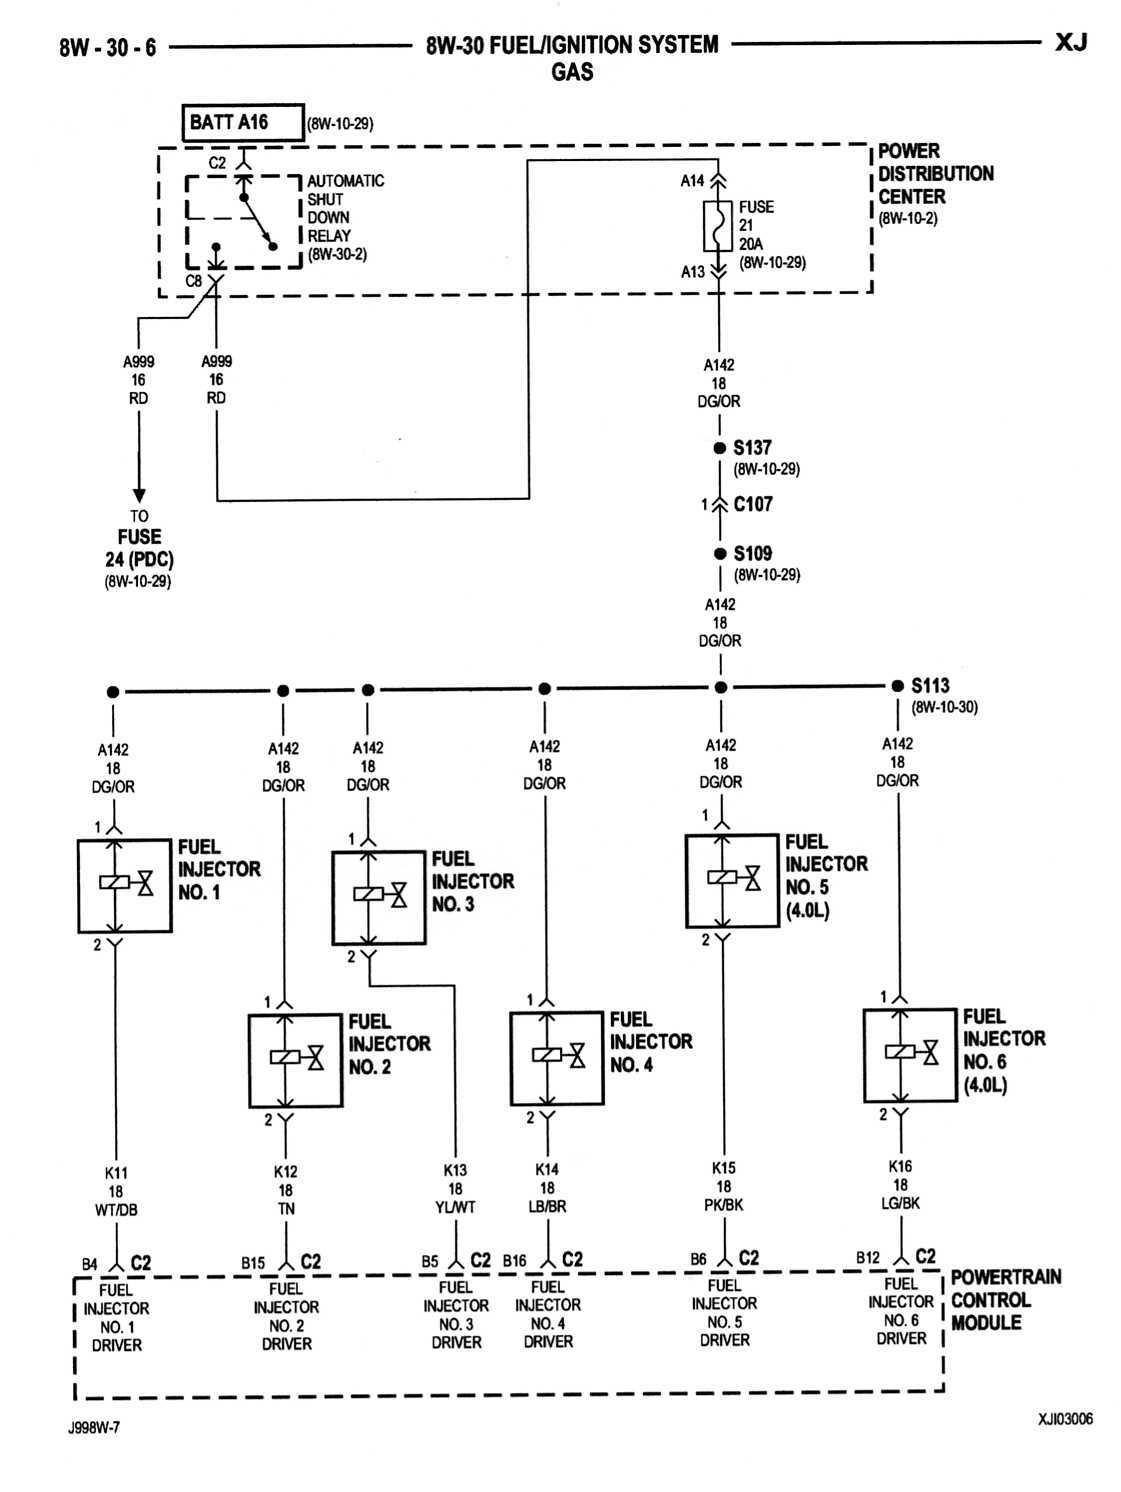 1999 Xj Classic - Melted Wiring Harness    - Page 2